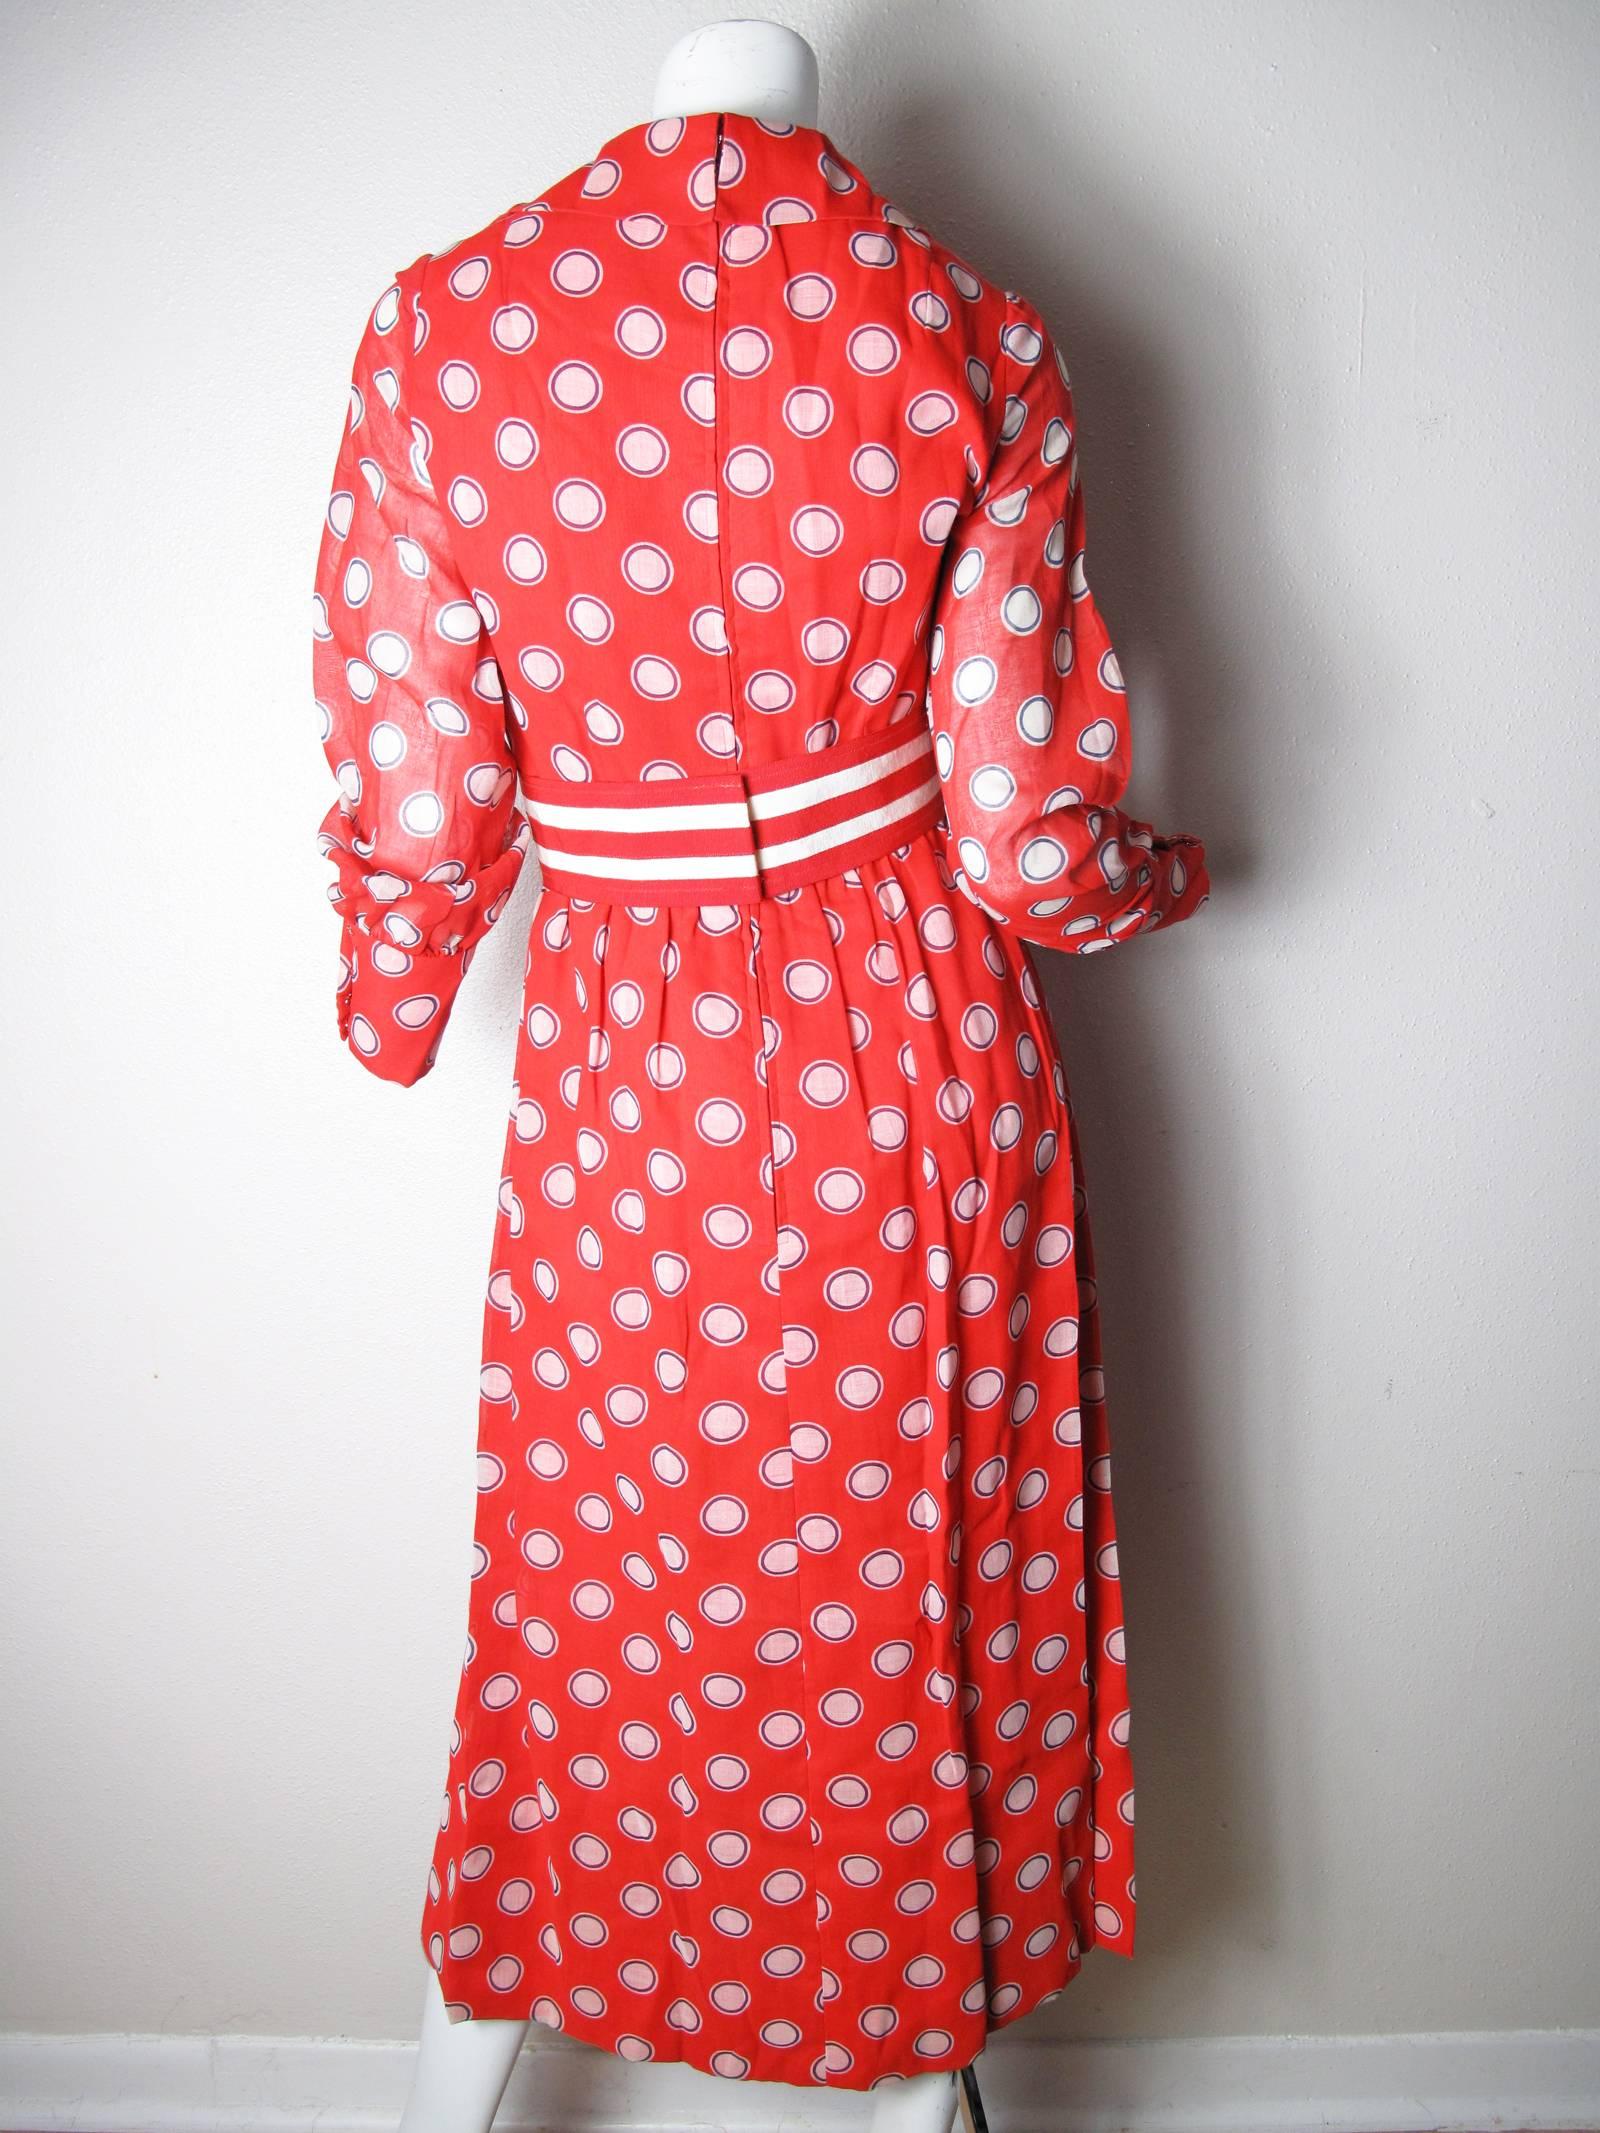 1970s Mollie Parnis Boutique sheer red, white and blue polka dot gown, lined.  Cotton type fabric.  With striped belt and side pockets. Condition: Good, small dark spot on belt. Size small - med

We accept returns for refund, please see our terms.